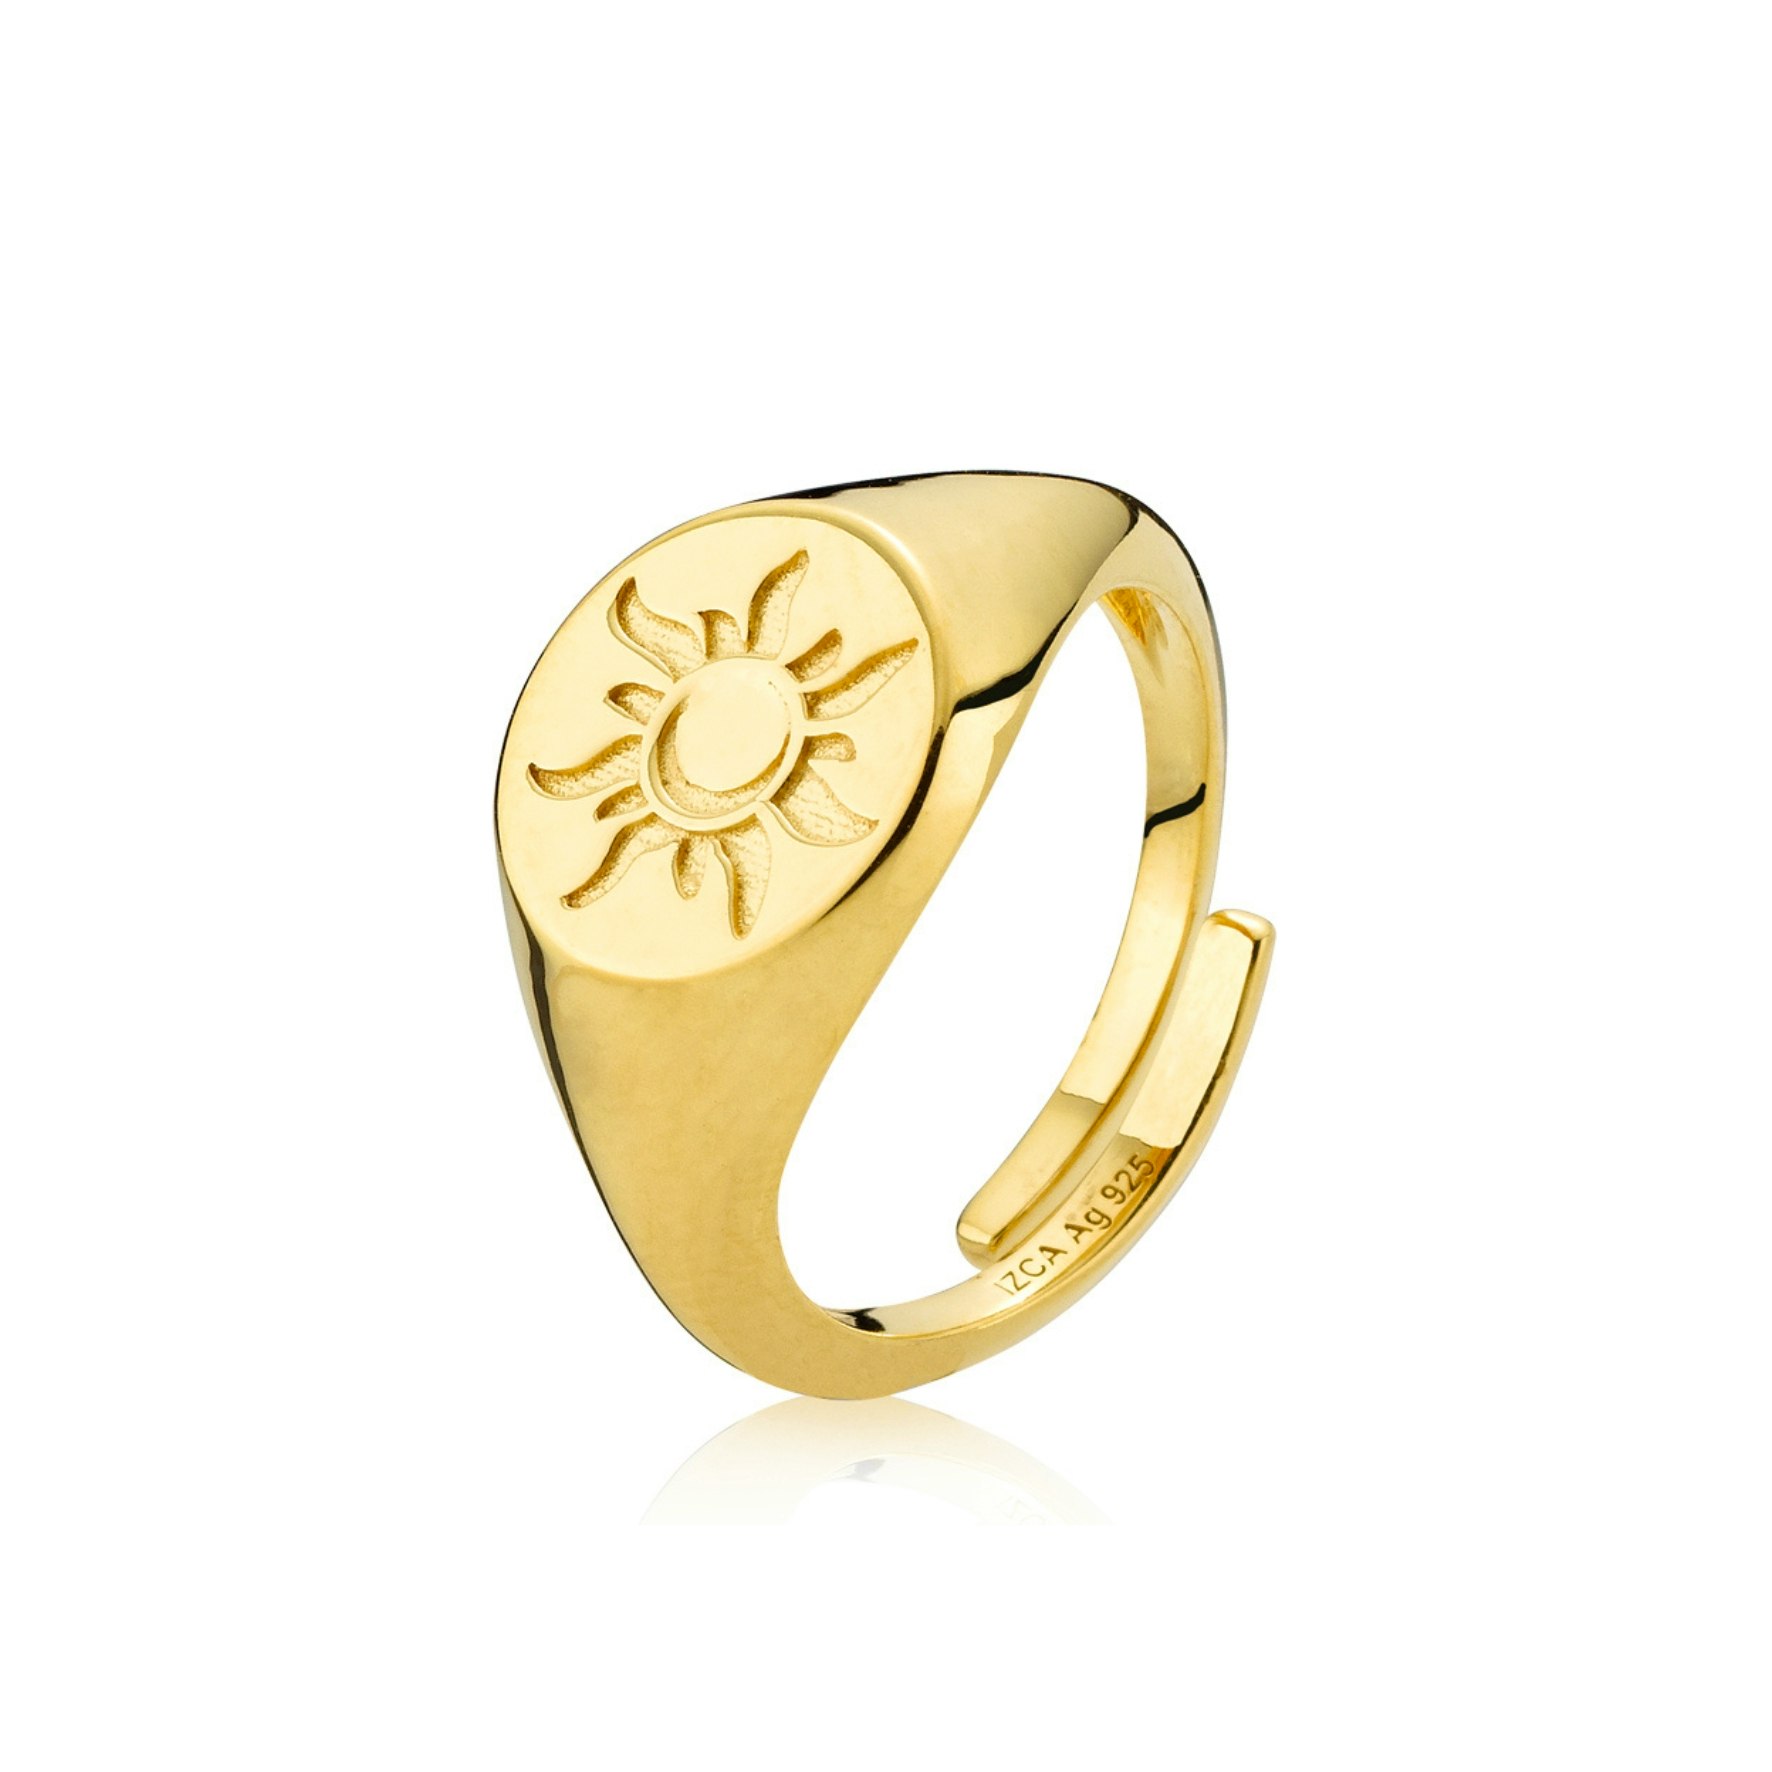 Universe Ring from Sistie in Goldplated Silver Sterling 925